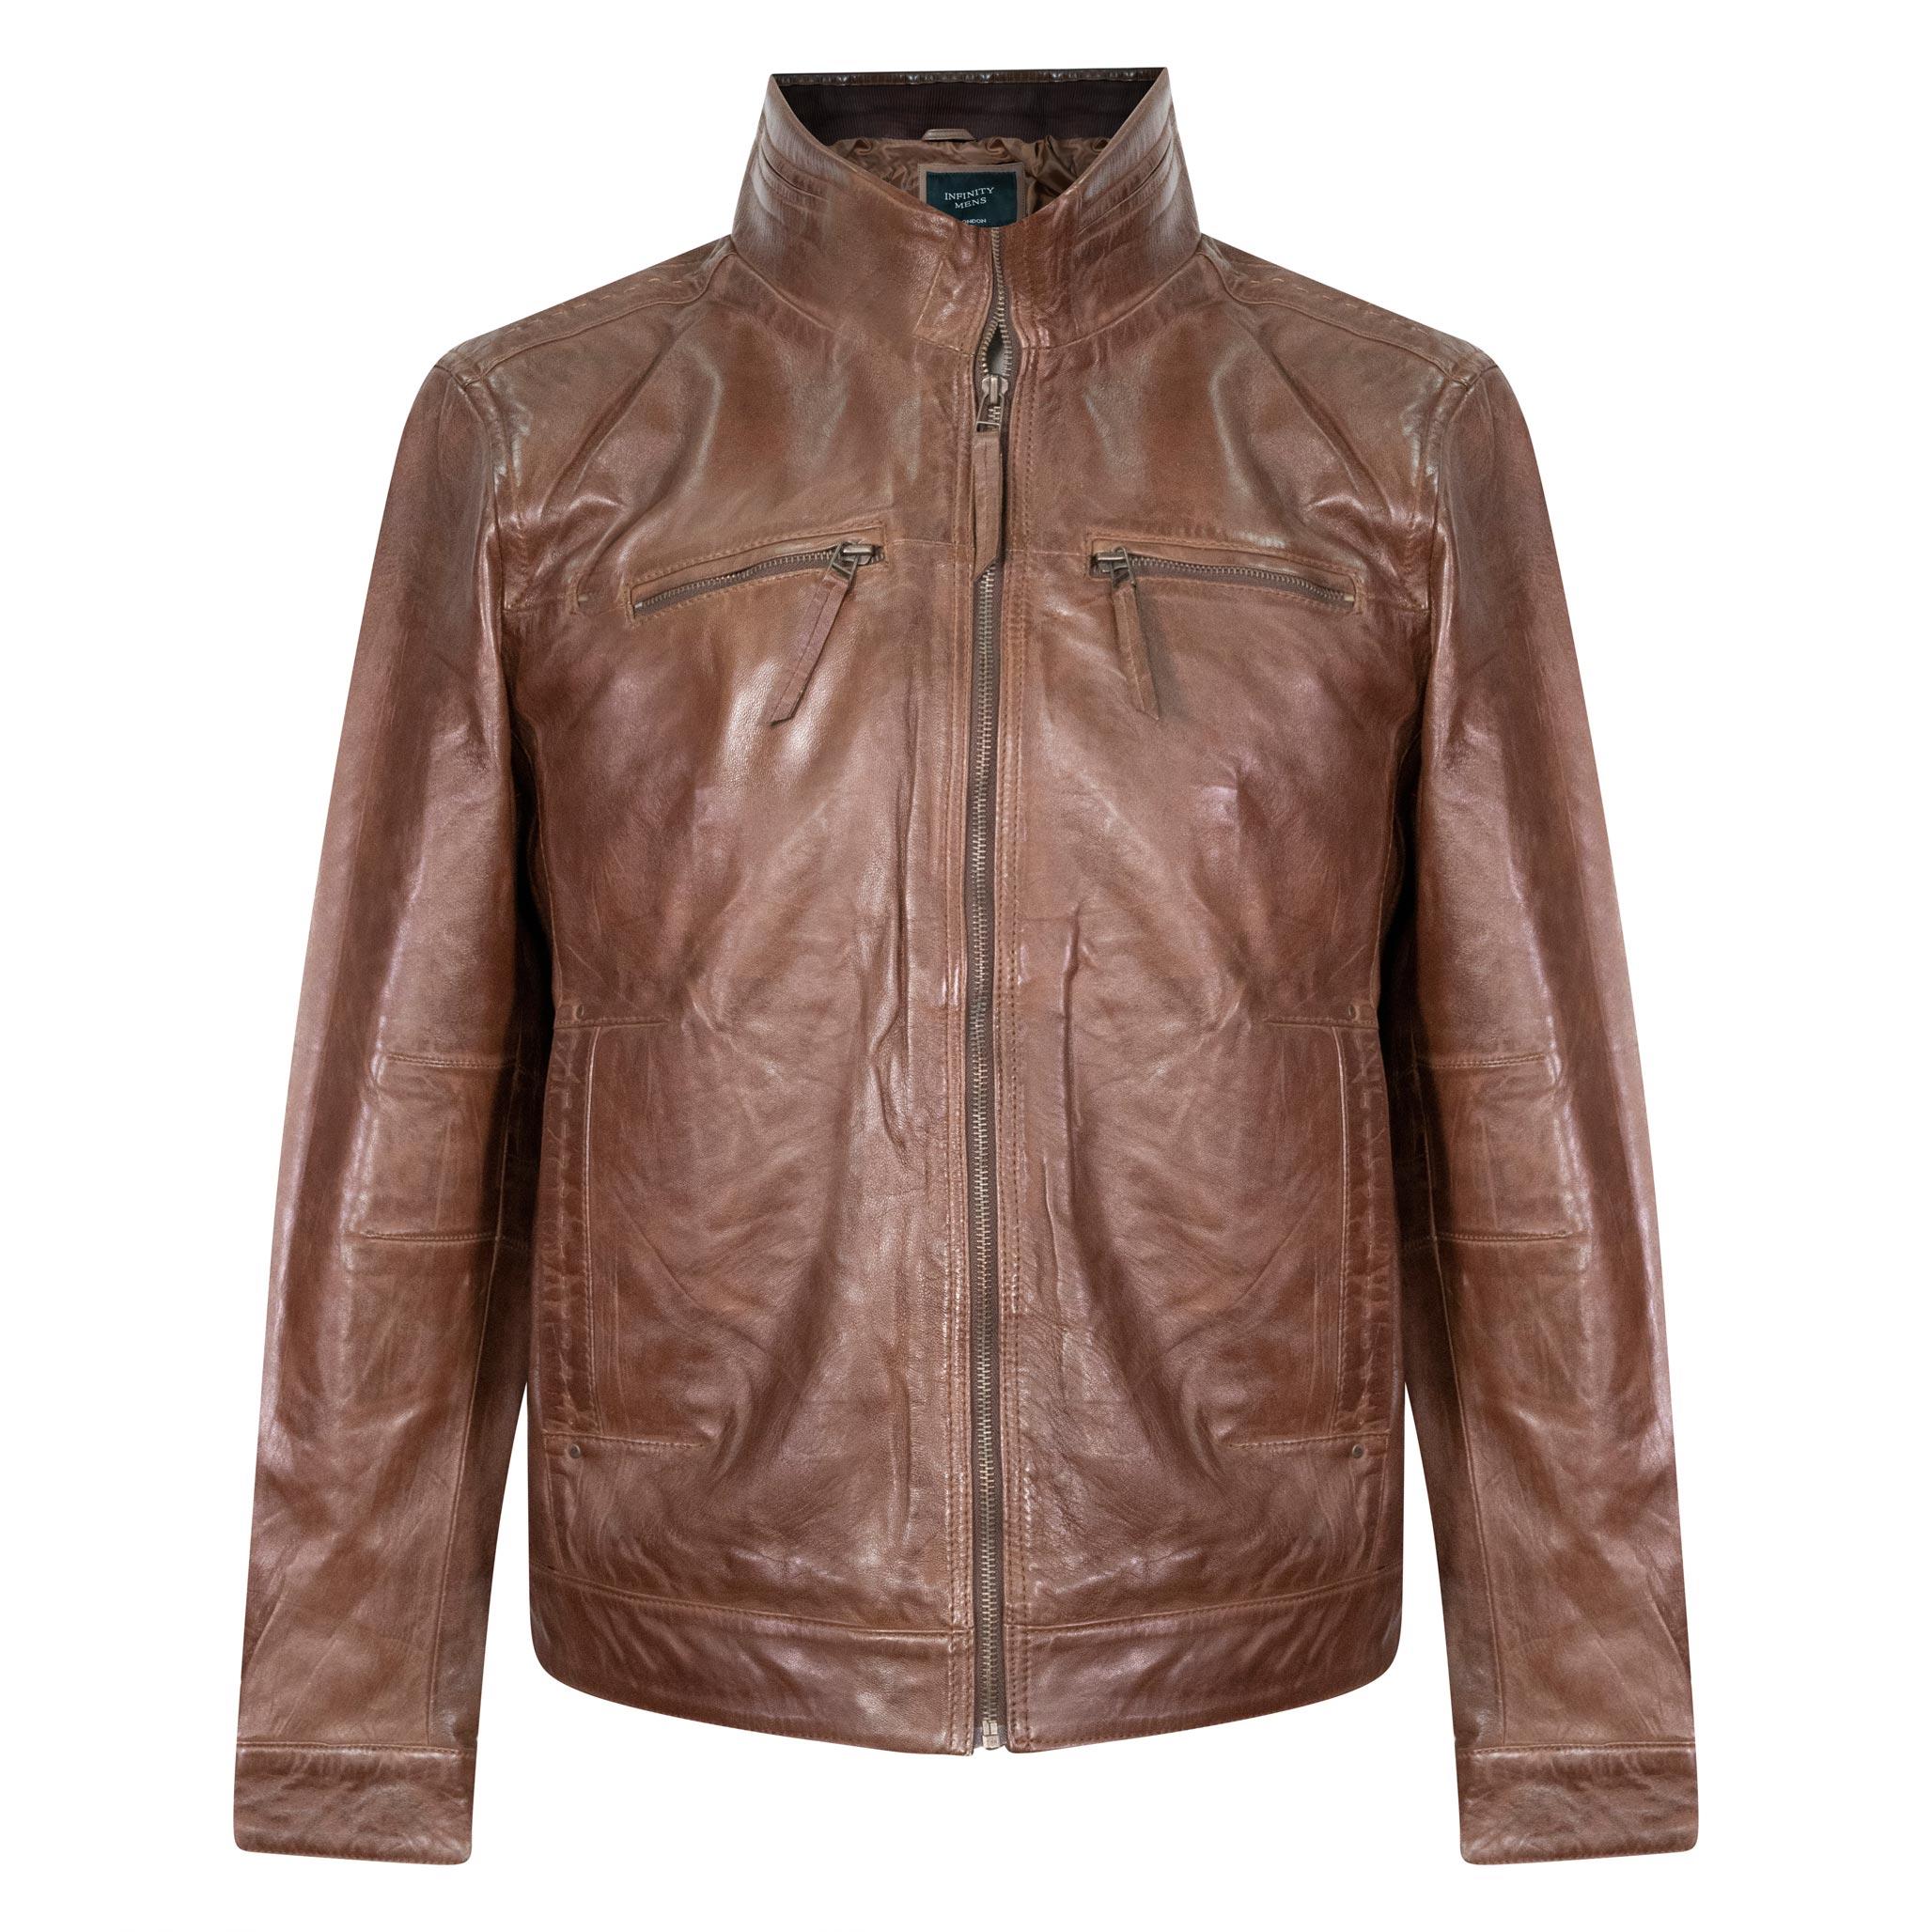 A mens sleek leather jacket in a beautiful chestnut brown. Horizontal zipped chest pockets, with a high funnel collar..